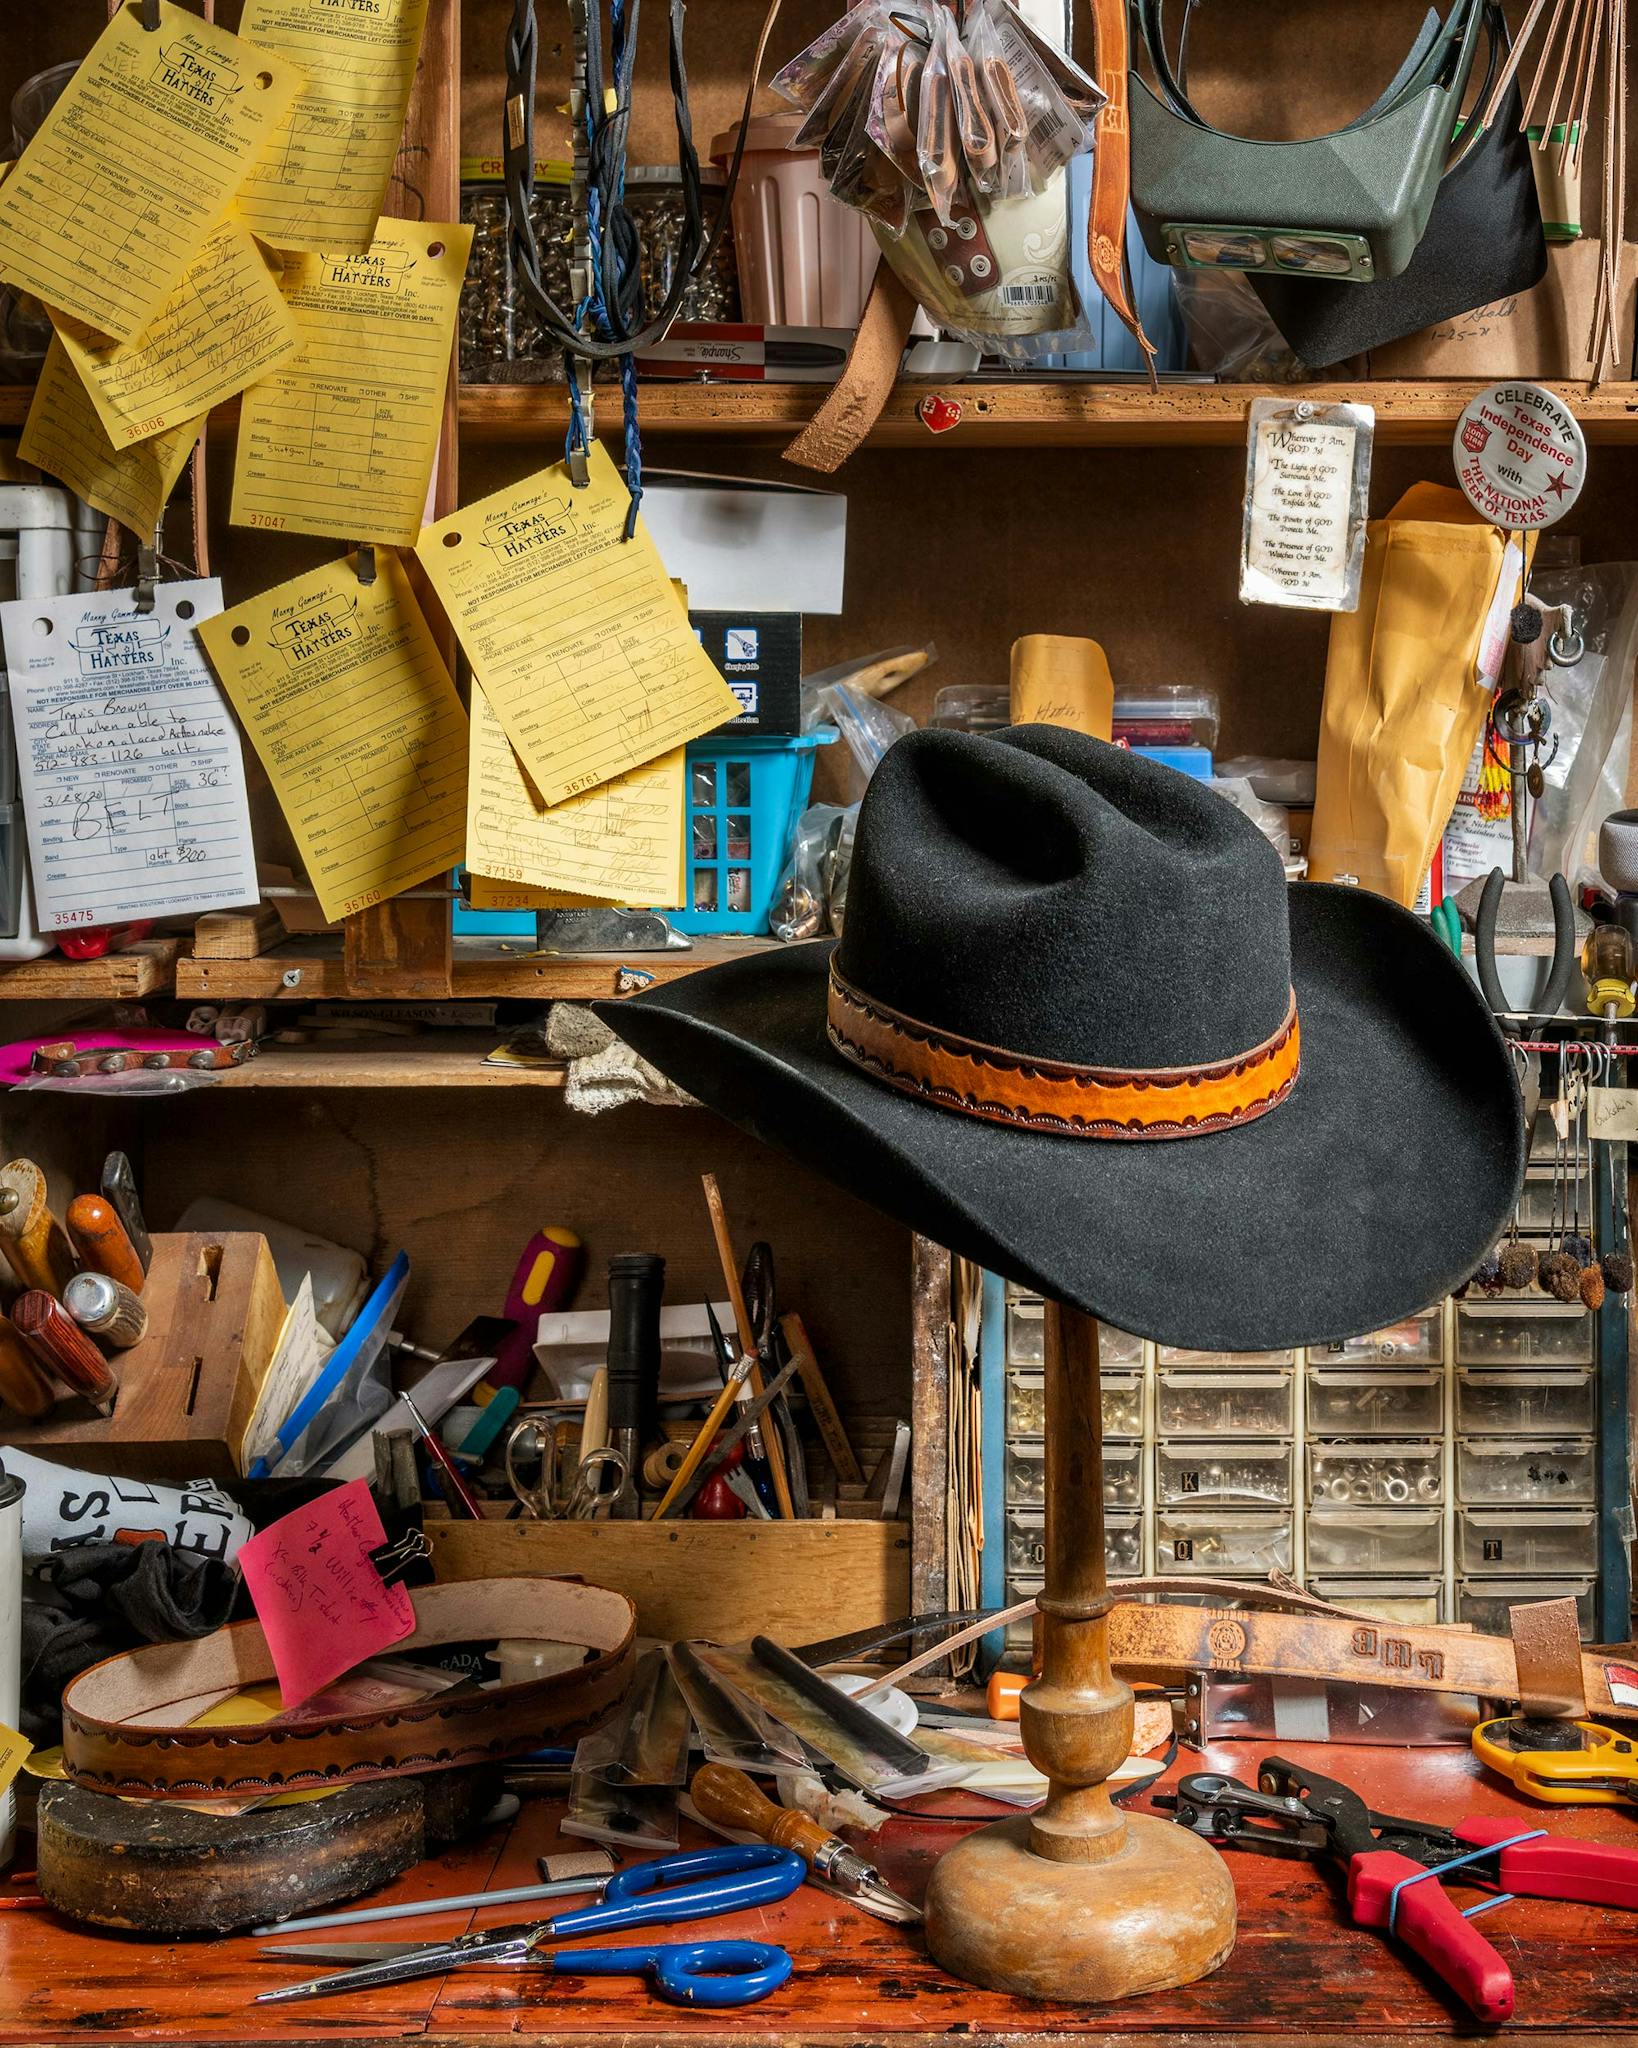 Texas Hatters Made in Teaxs